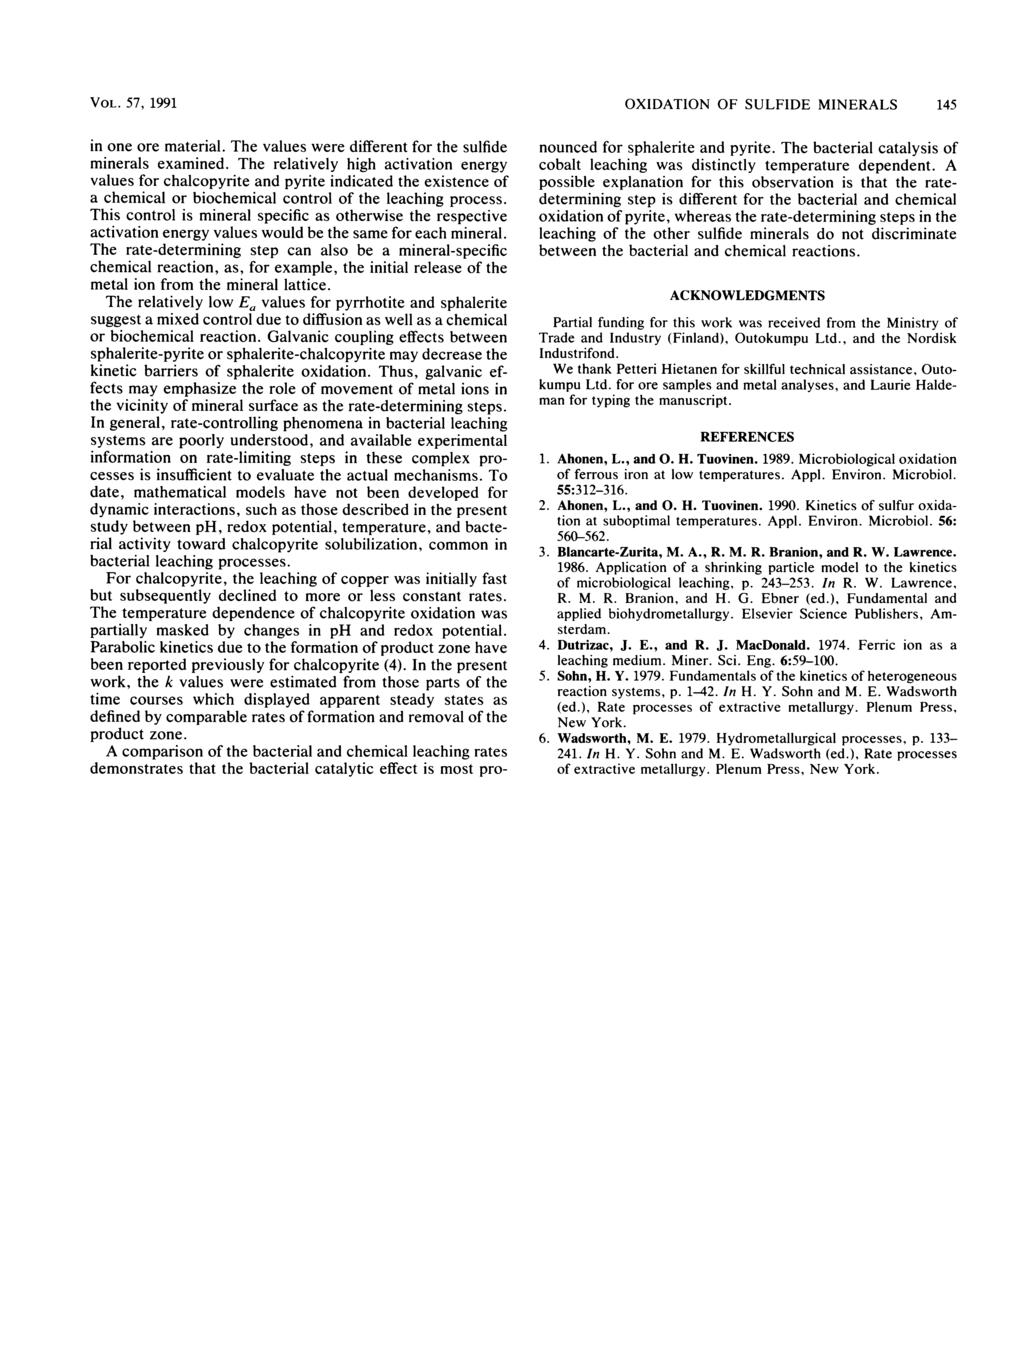 VOL. 57, 1991 in one ore material. The values were different for the sulfide minerals examined.